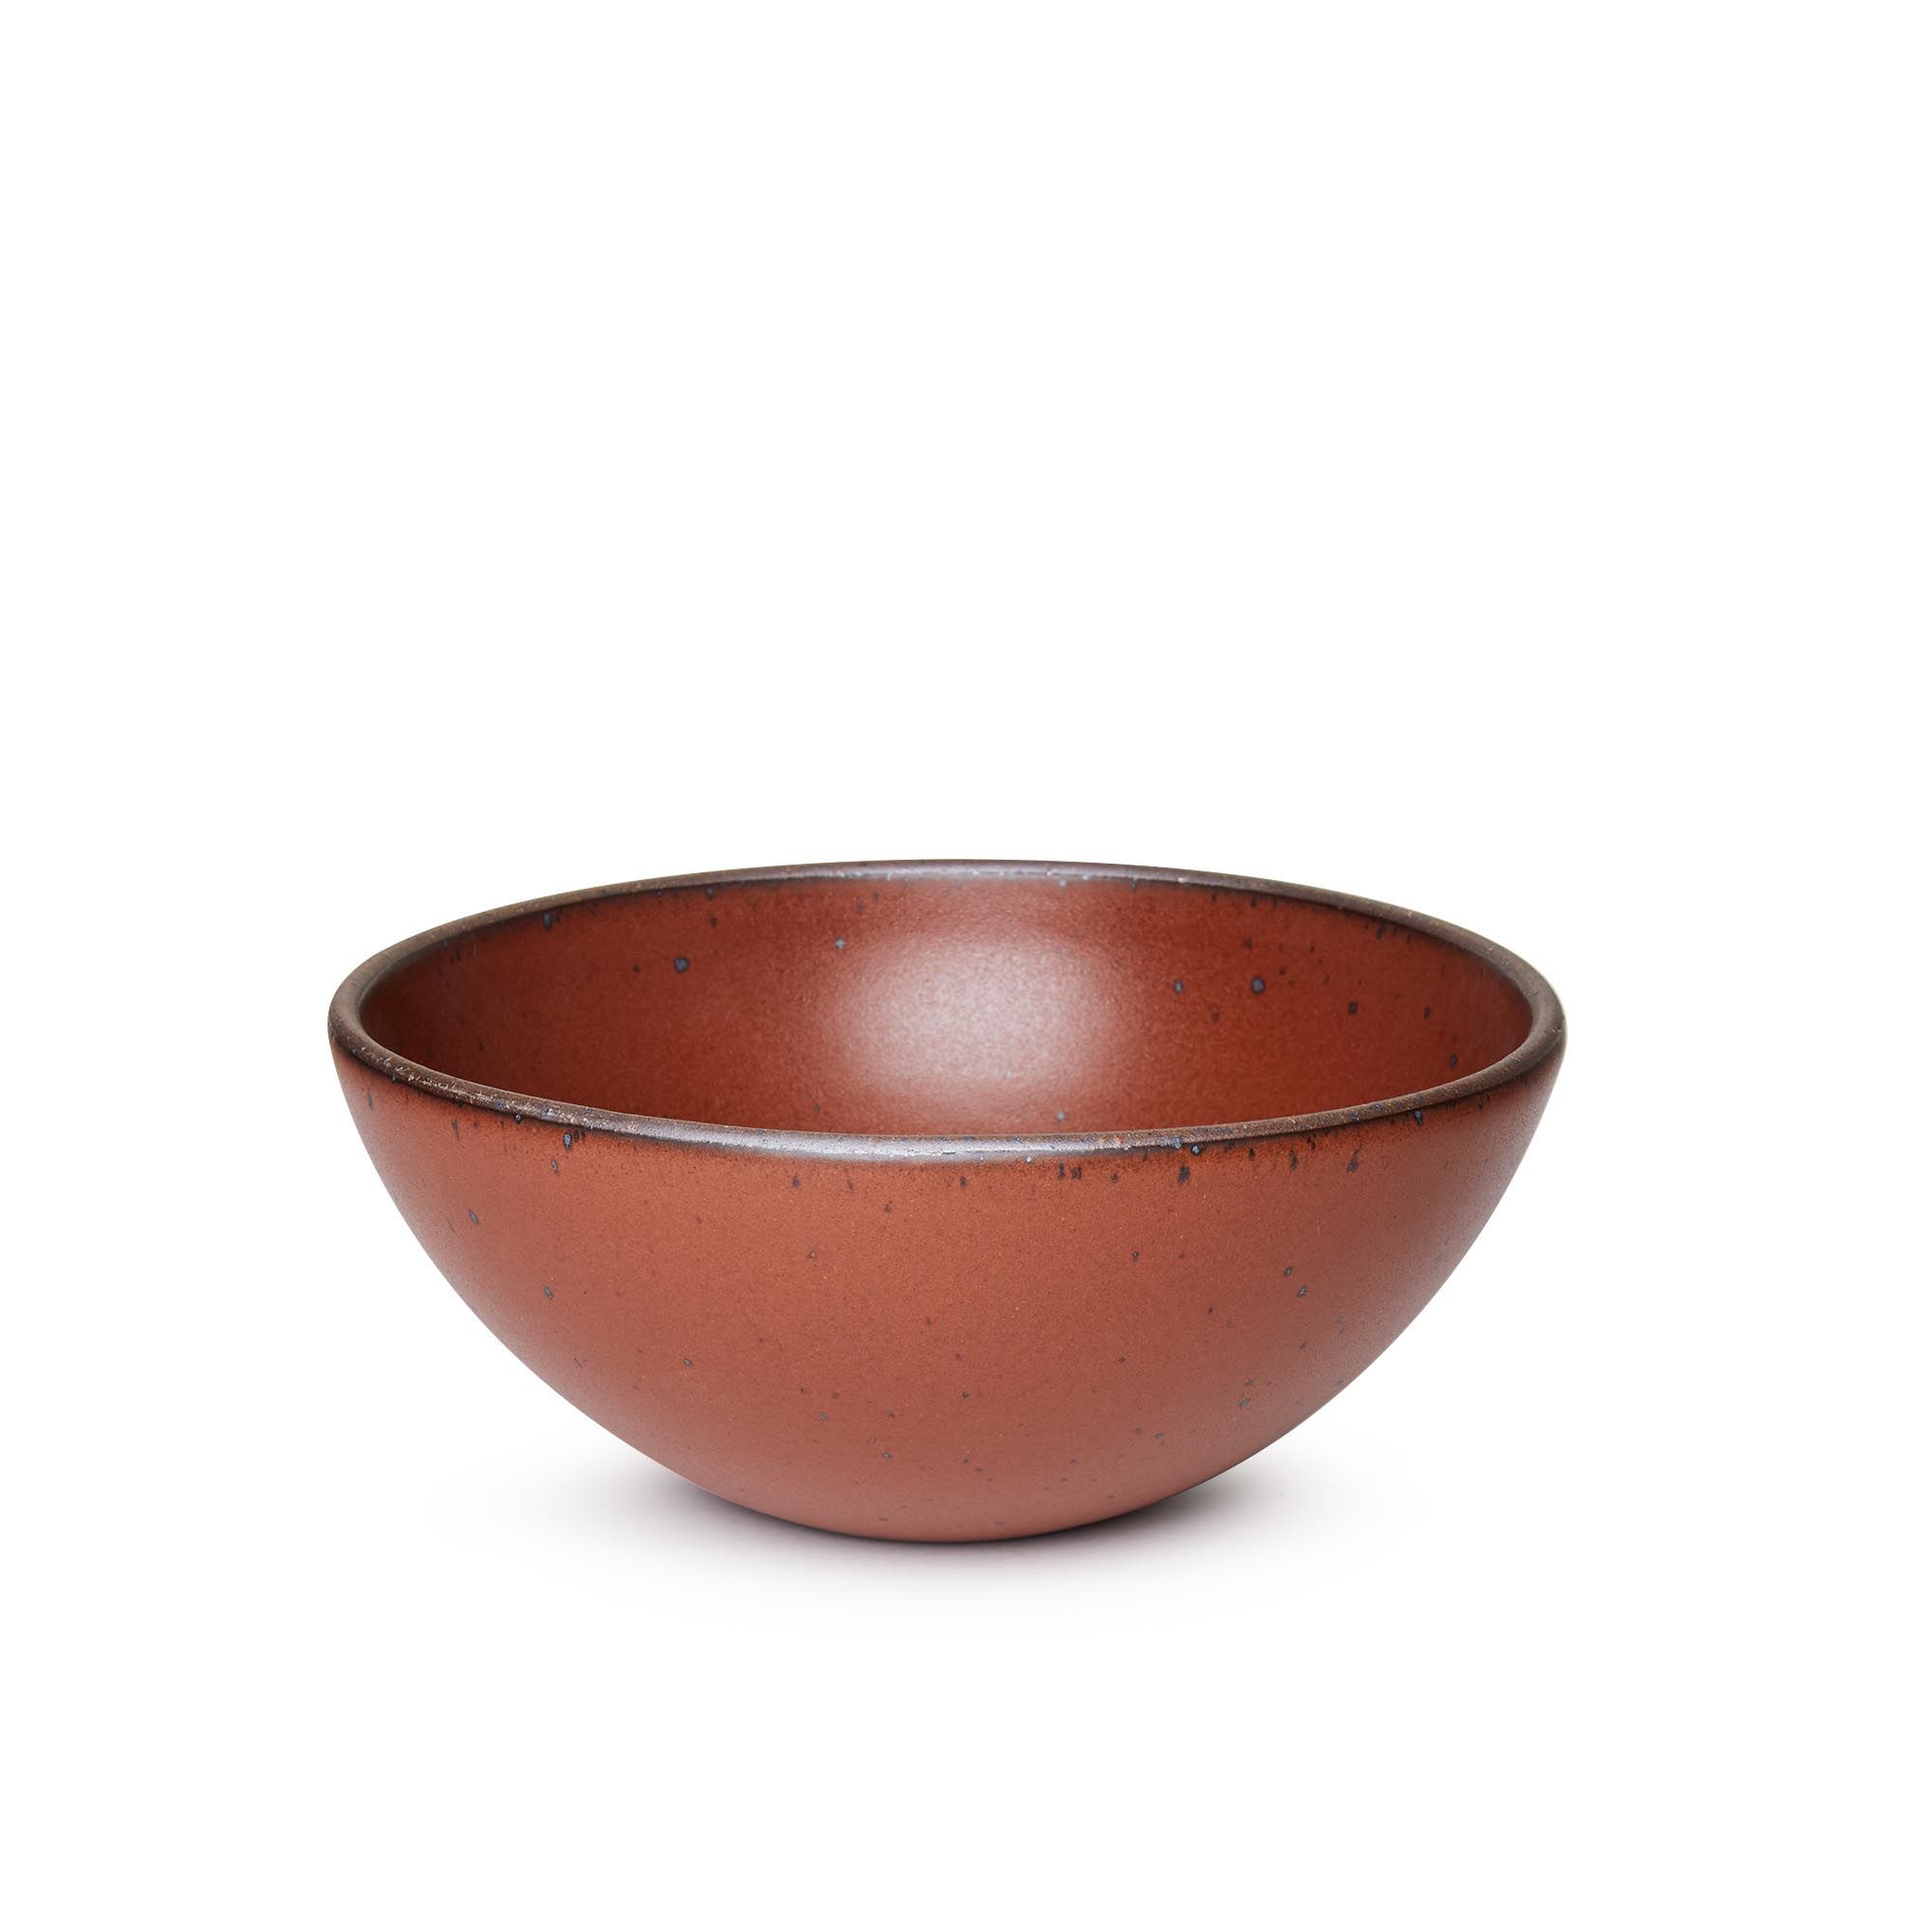 A large rounded ceramic bowl in a cool burnt terracotta color featuring iron speckles and an unglazed rim